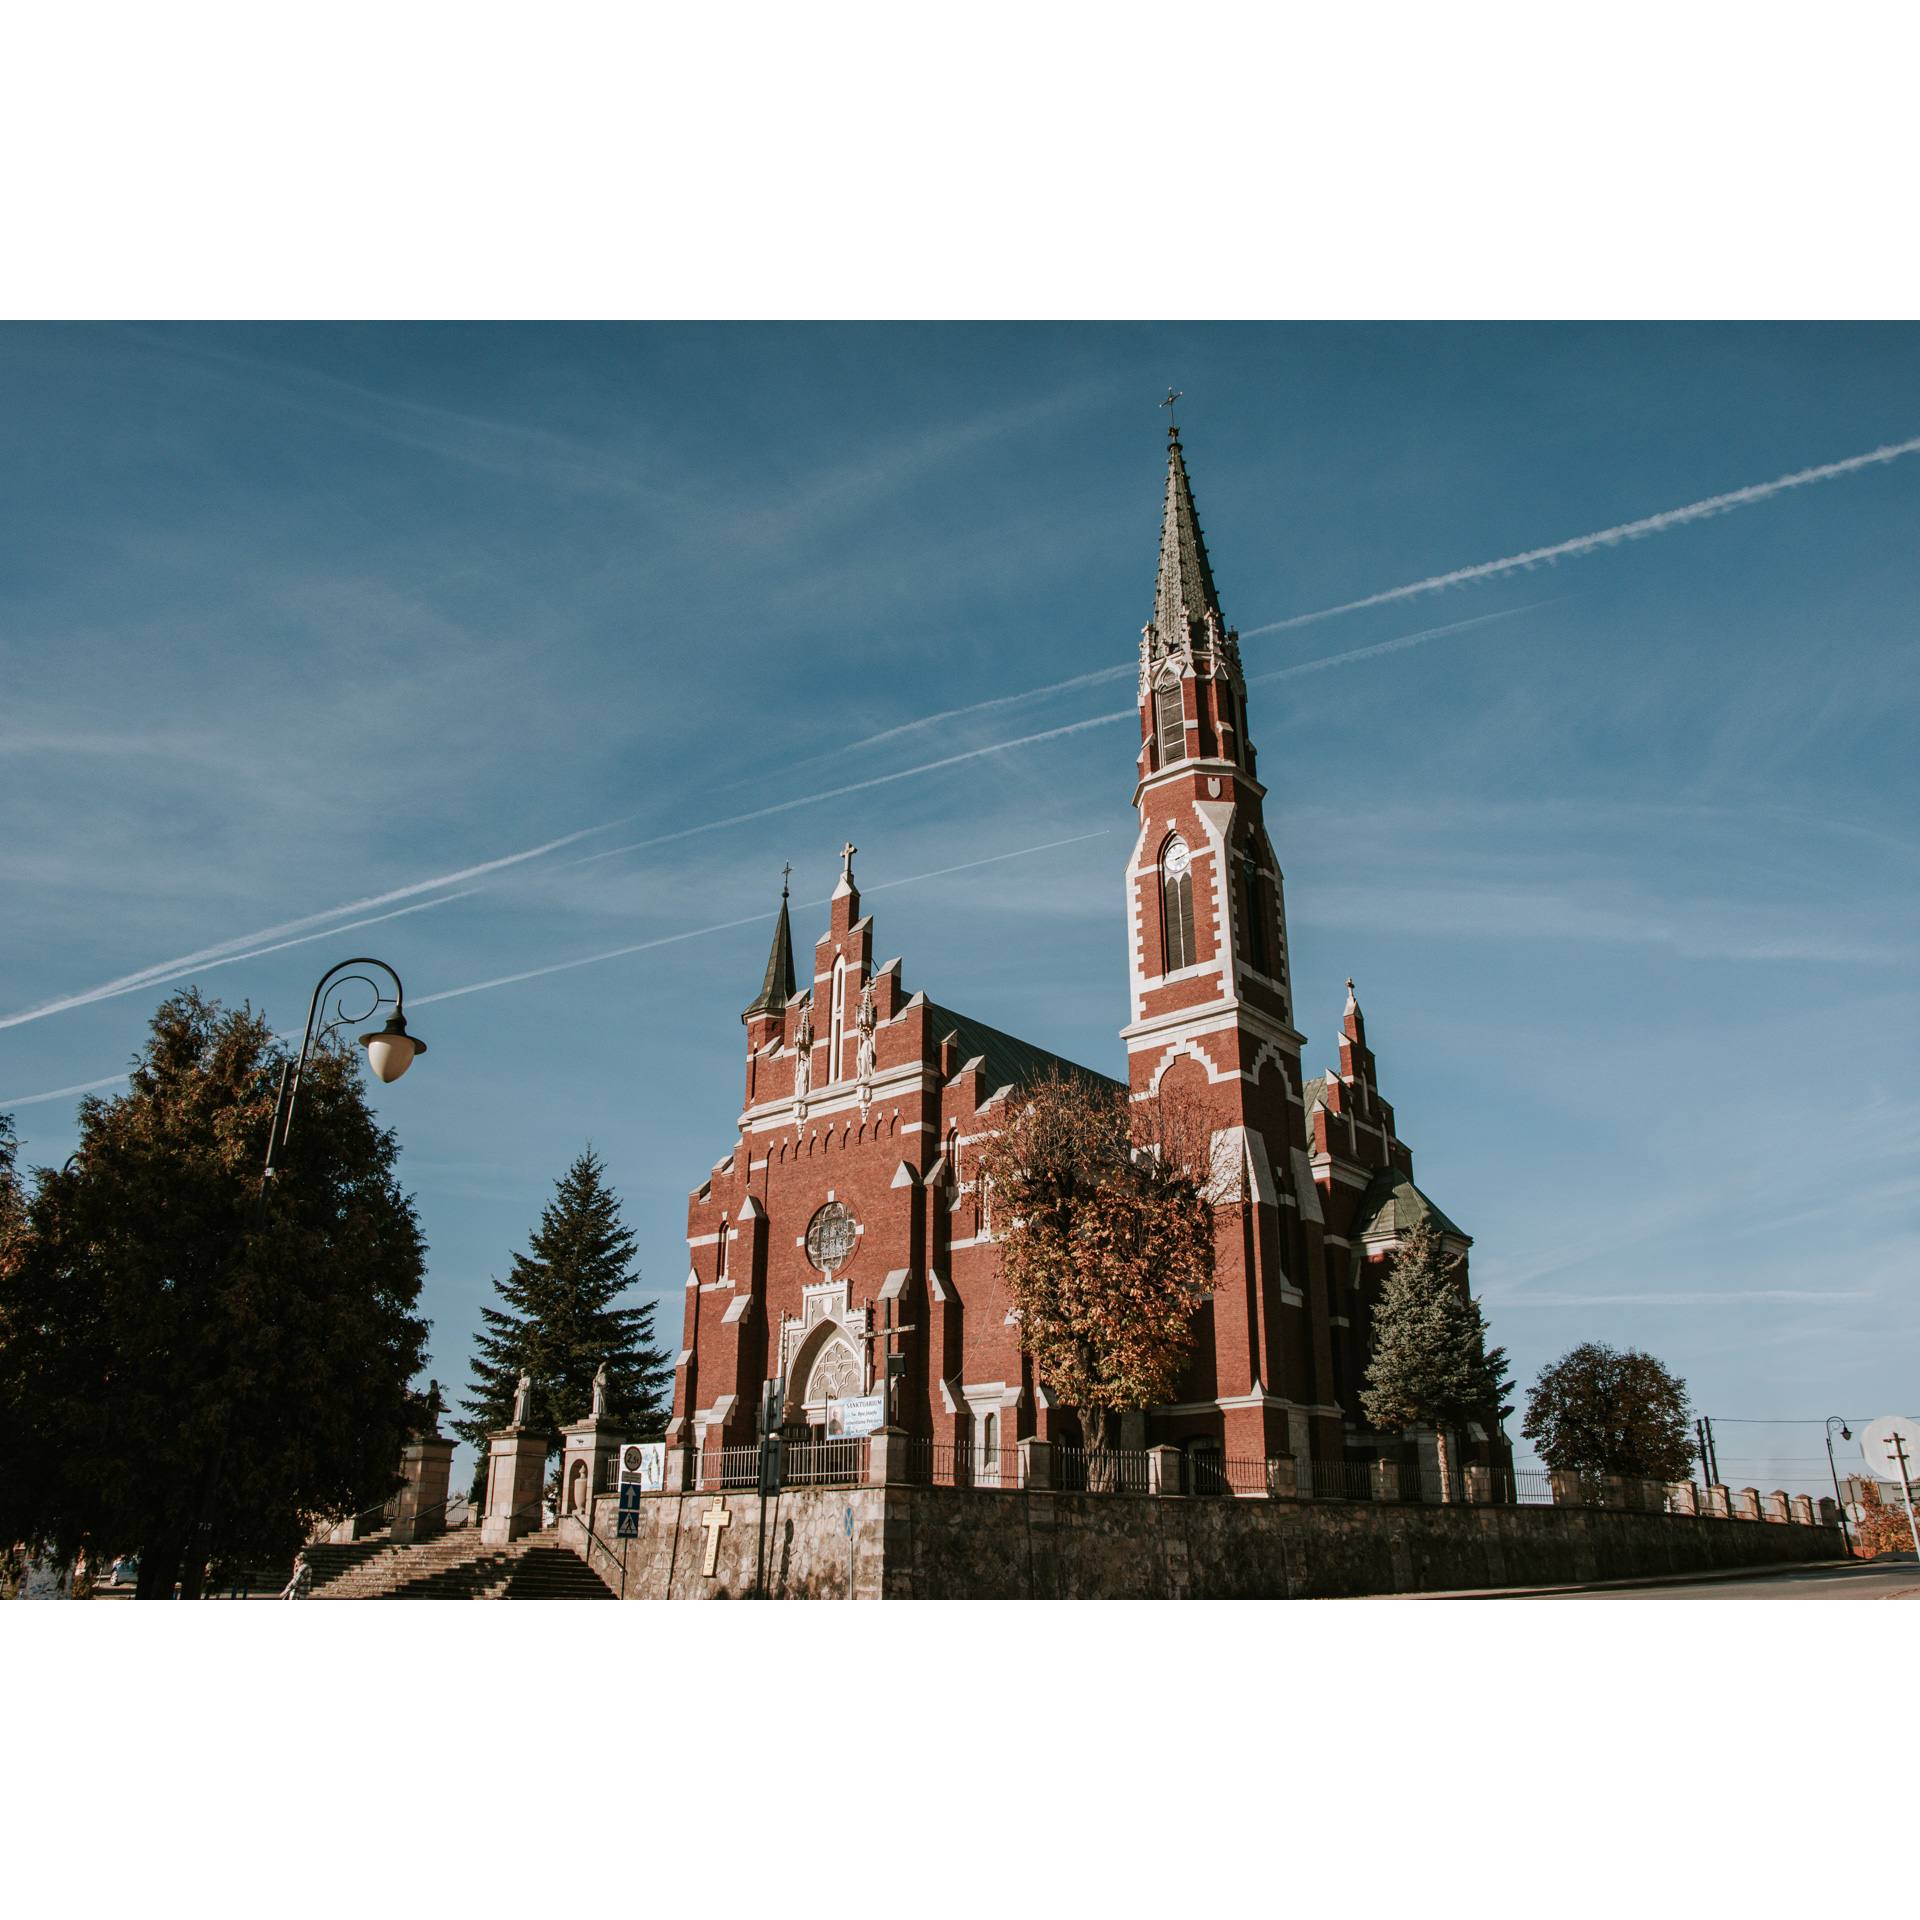 A soaring red brick church with white elements